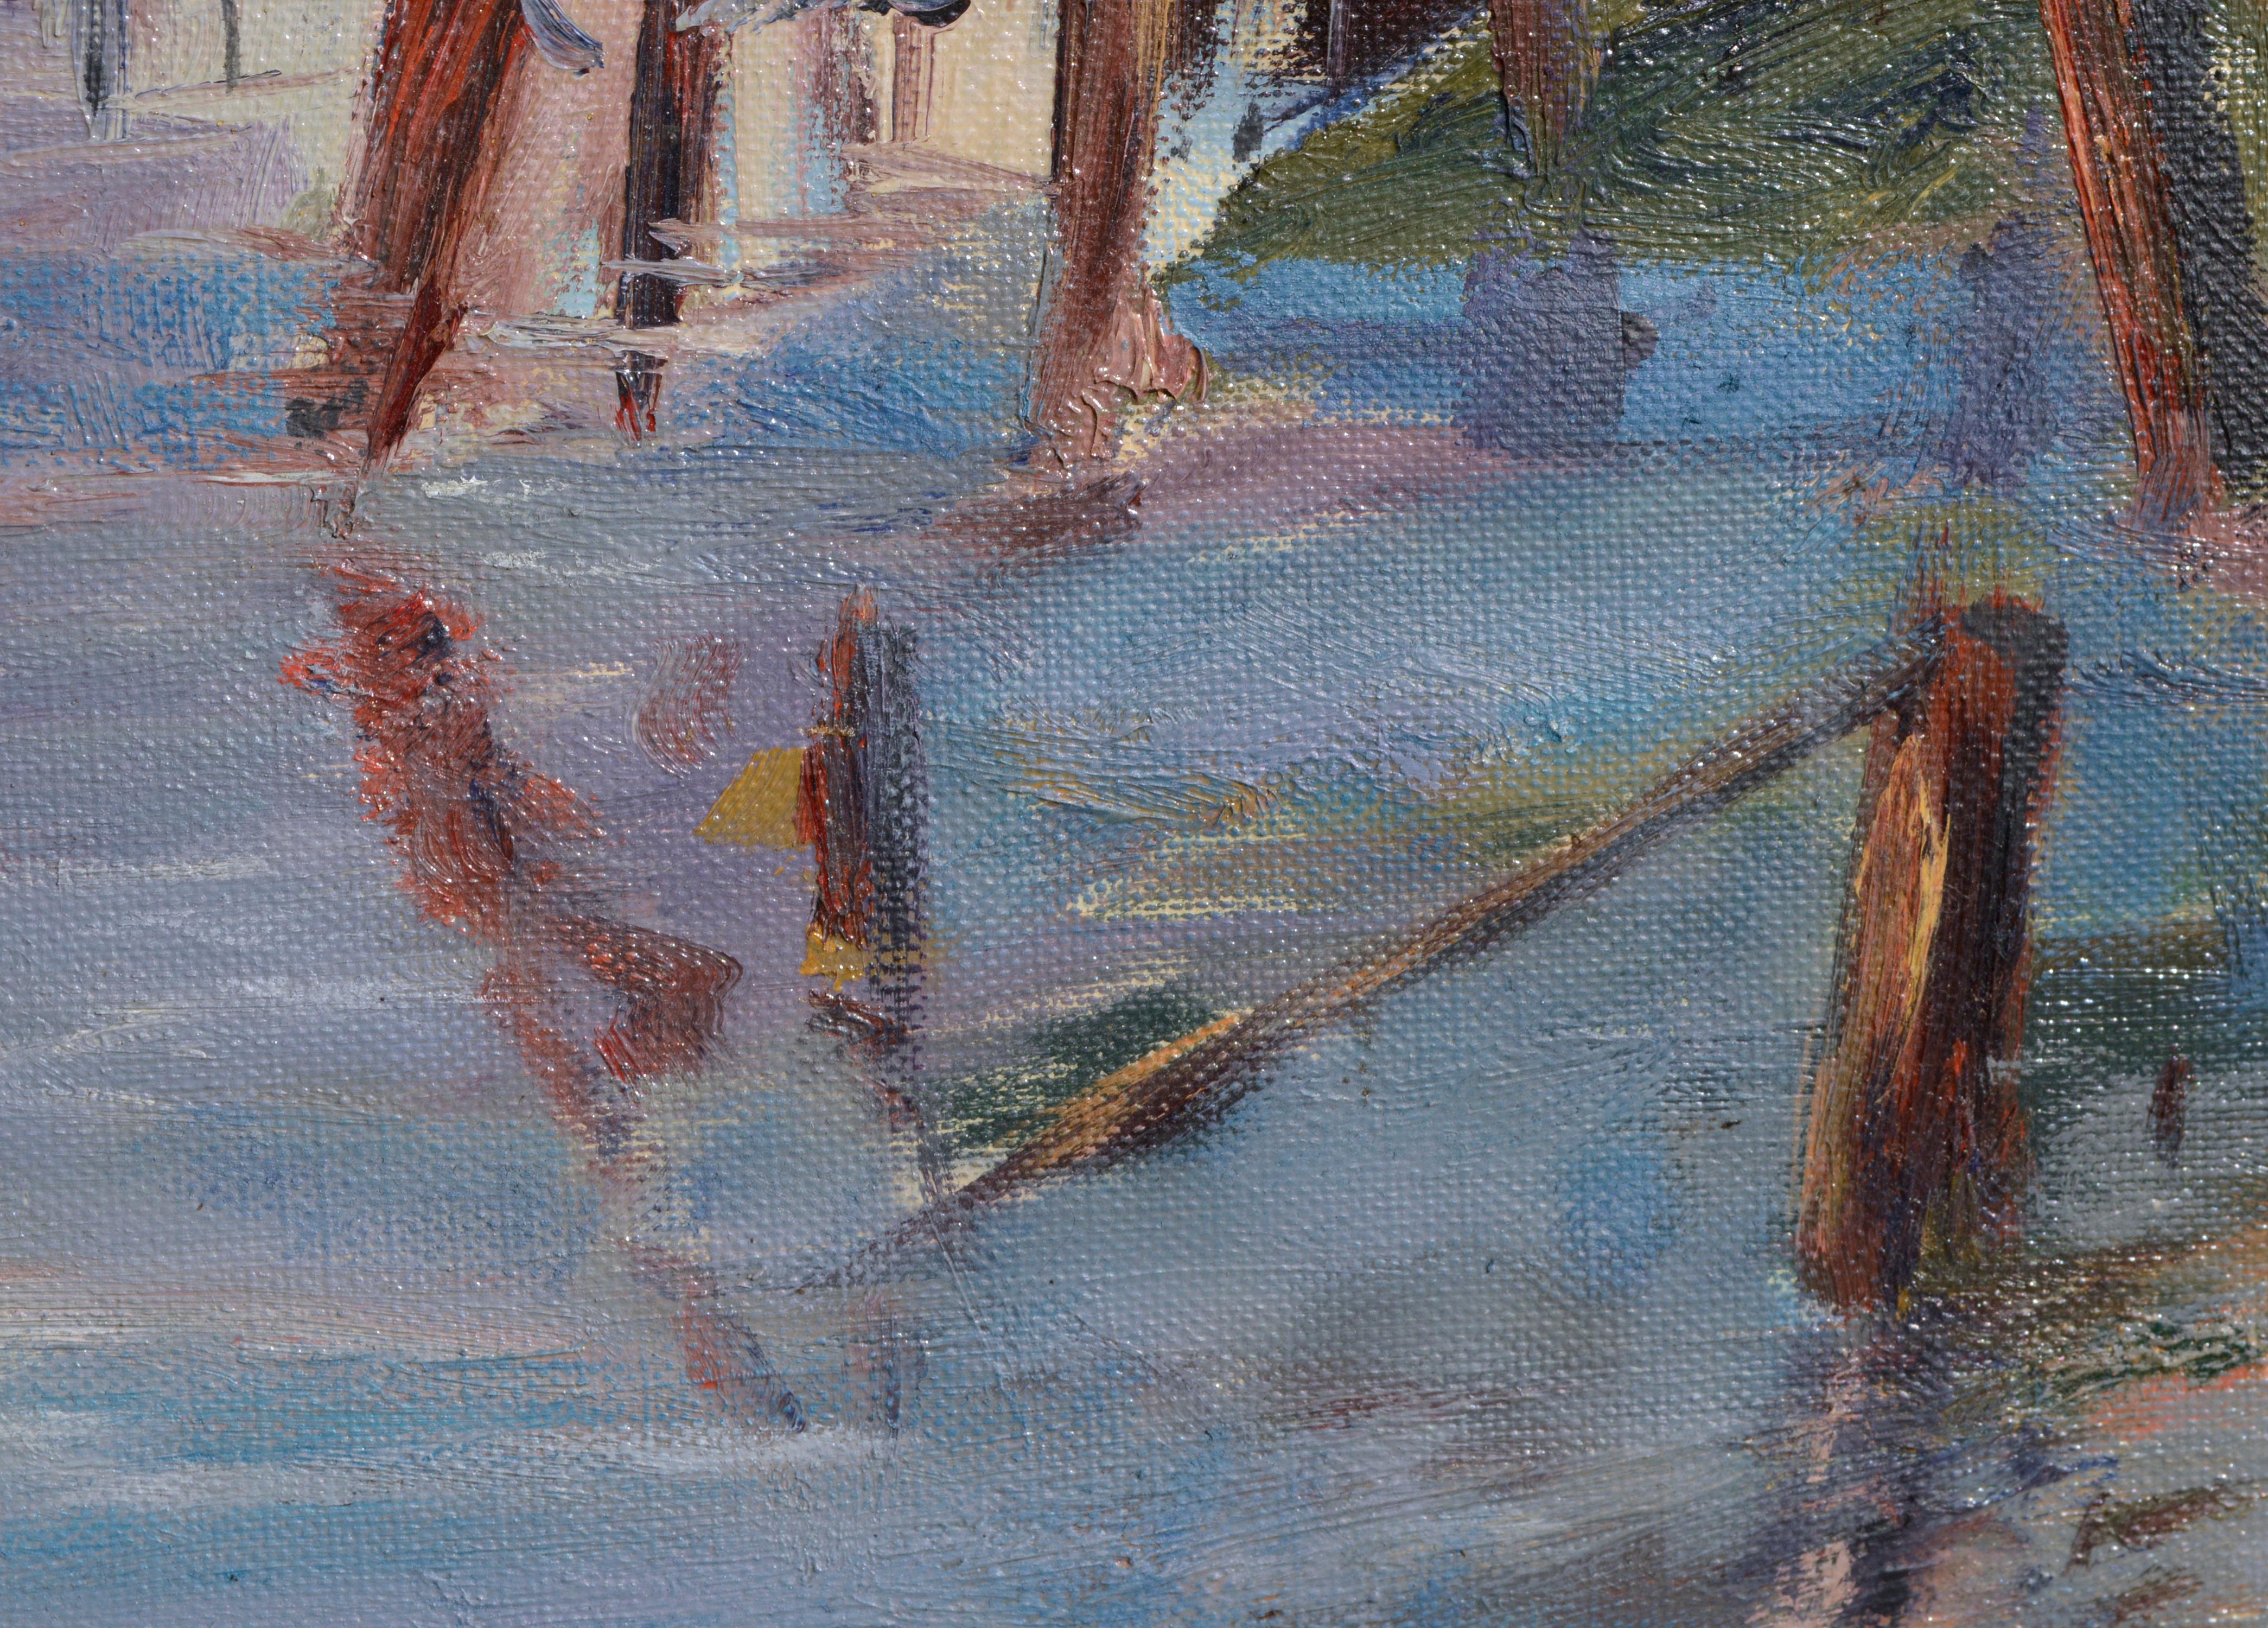 Abstracted Monterey Wharf, Shacks on the Dock Landscape  - Abstract Impressionist Painting by Unknown